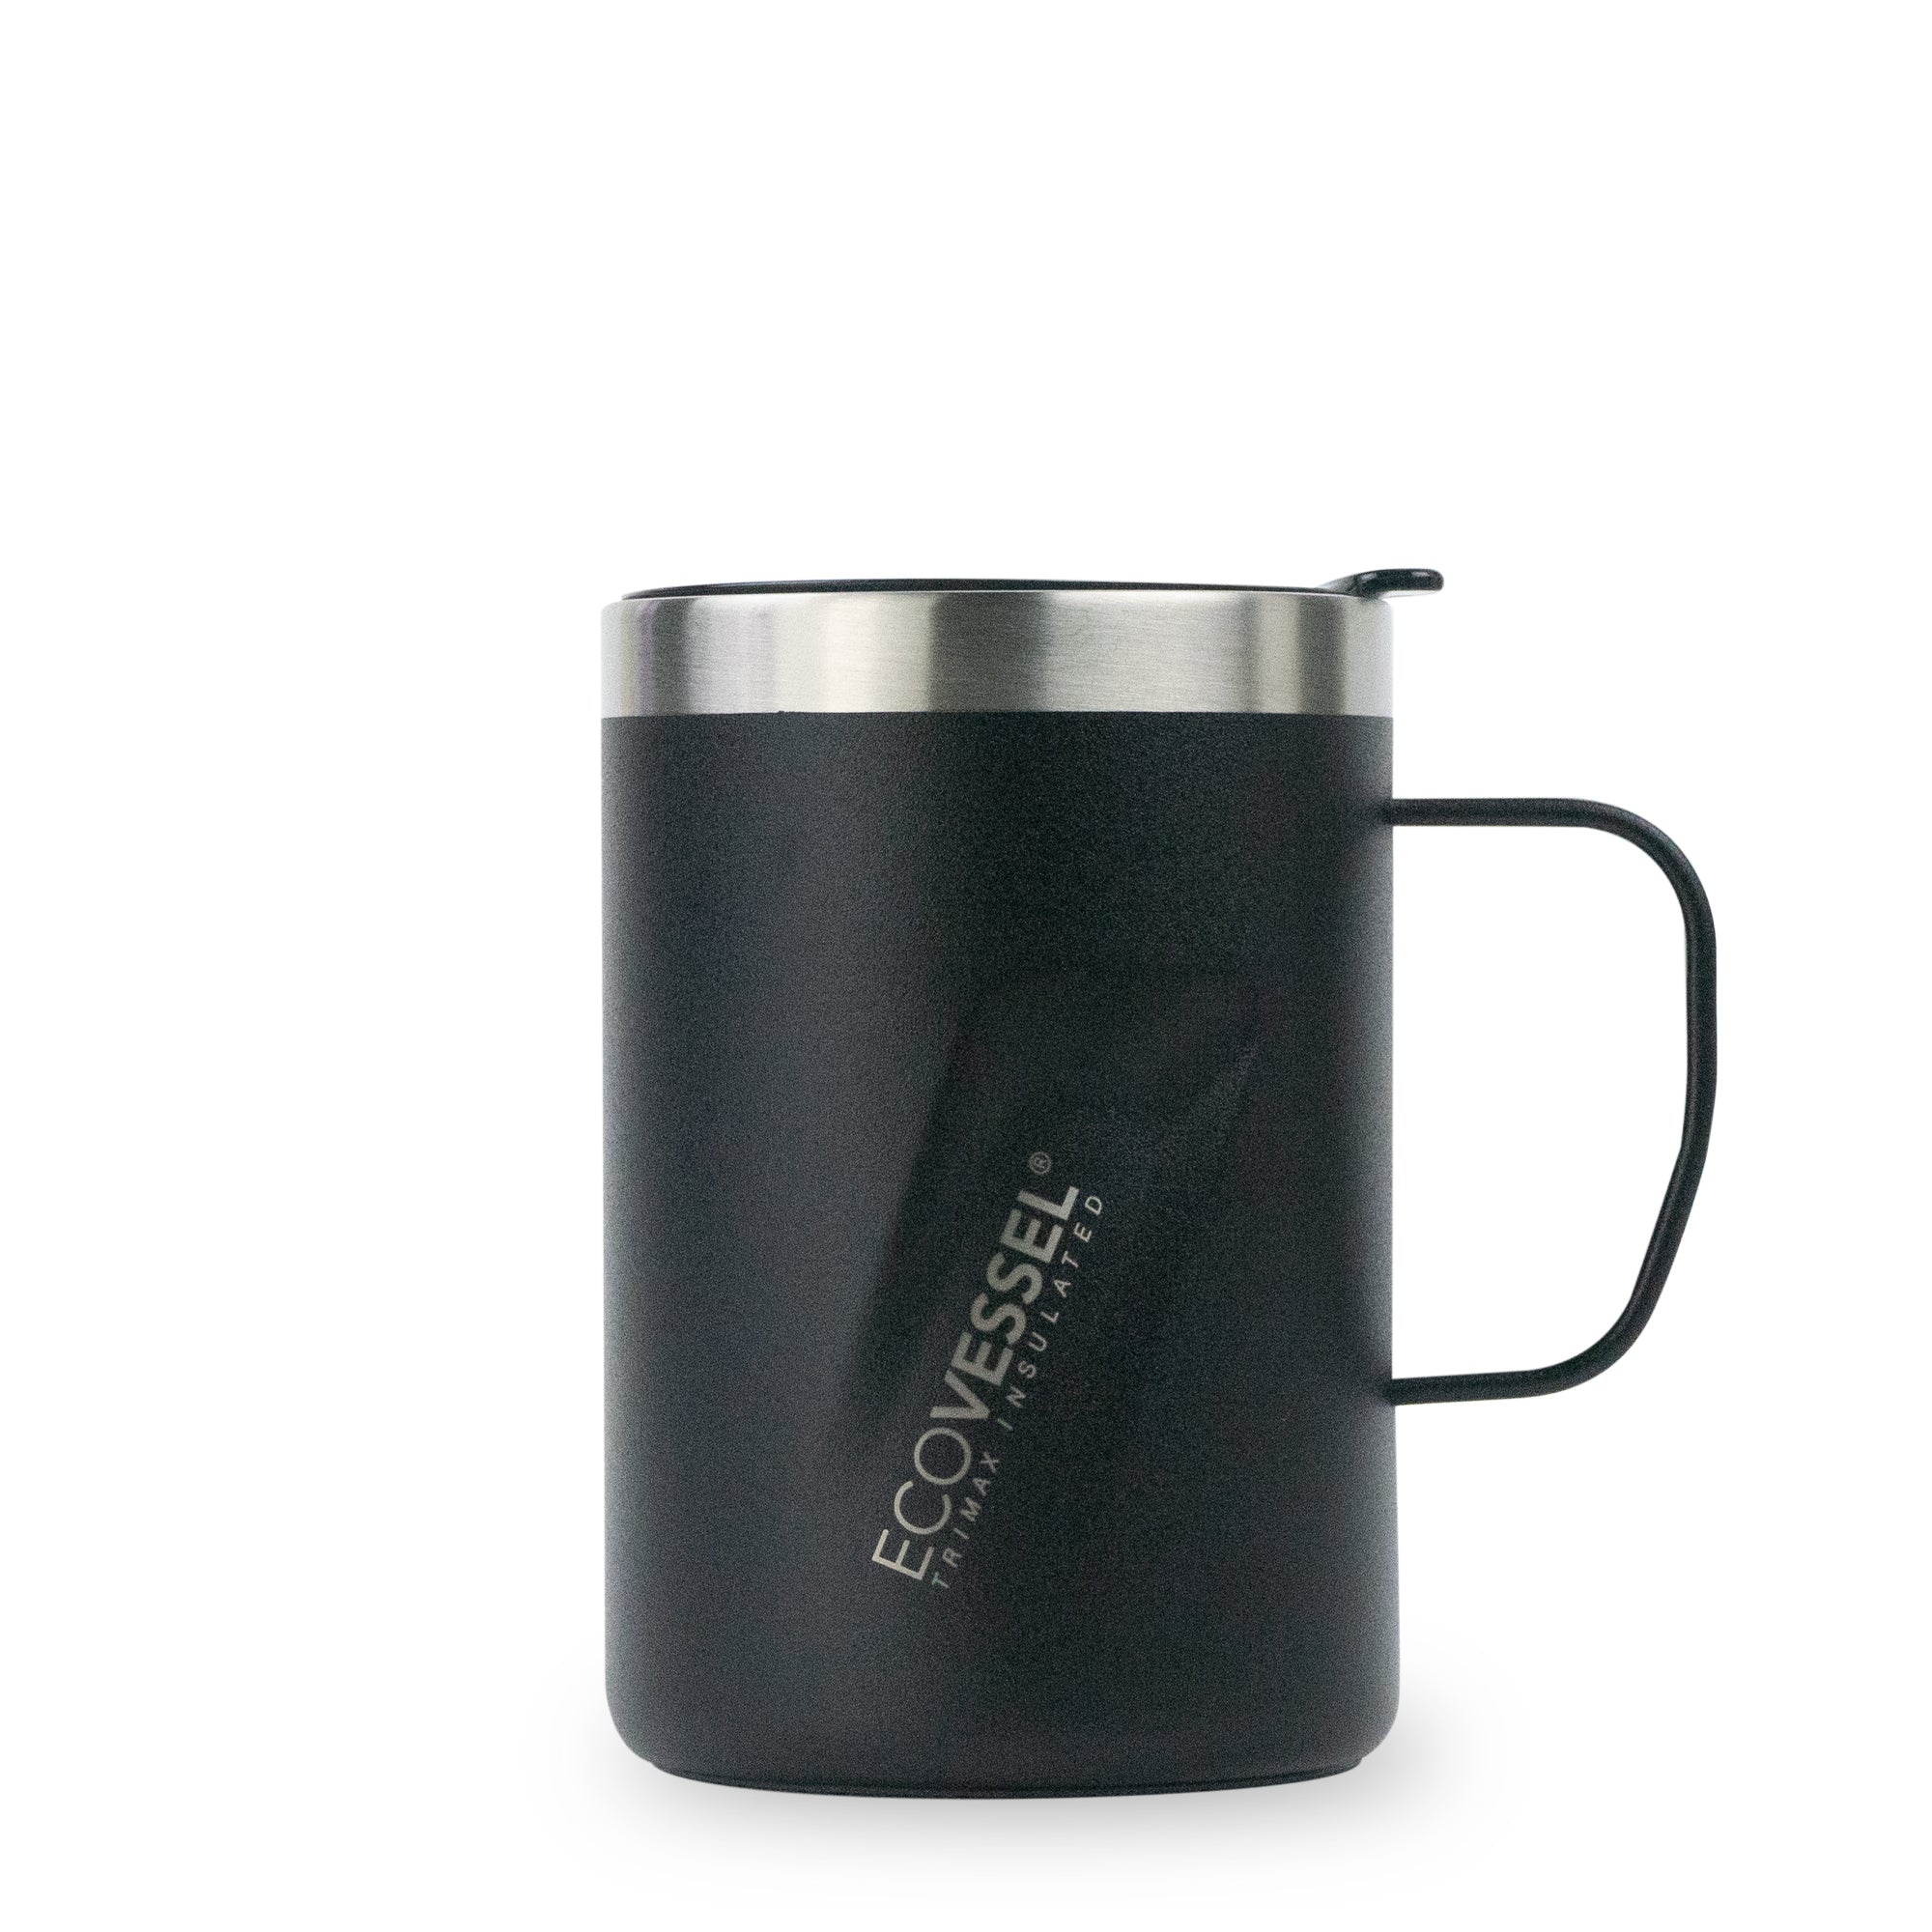 14 oz. Stainless Steel Mug with Microban Infused Lid* Coral Reef by Arctic Zone